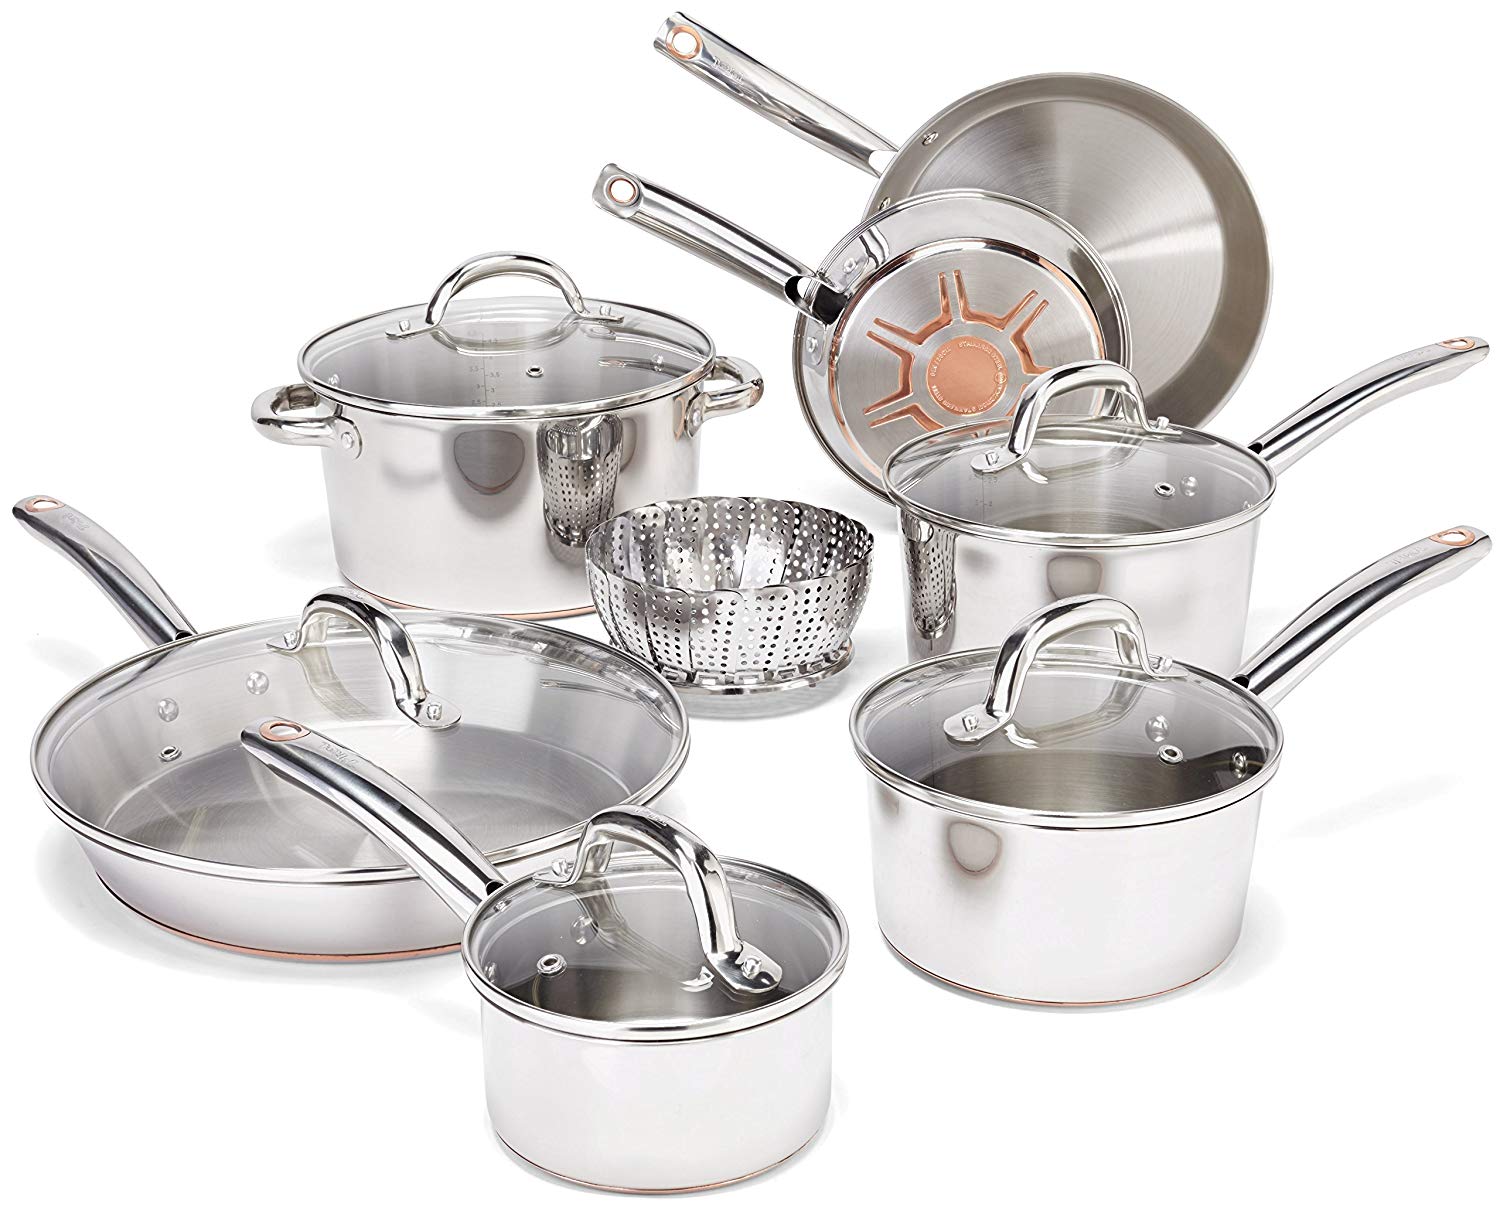 Tfal Stainless Steel Cookware Set Model C836SD [Review] YourKitchenTime